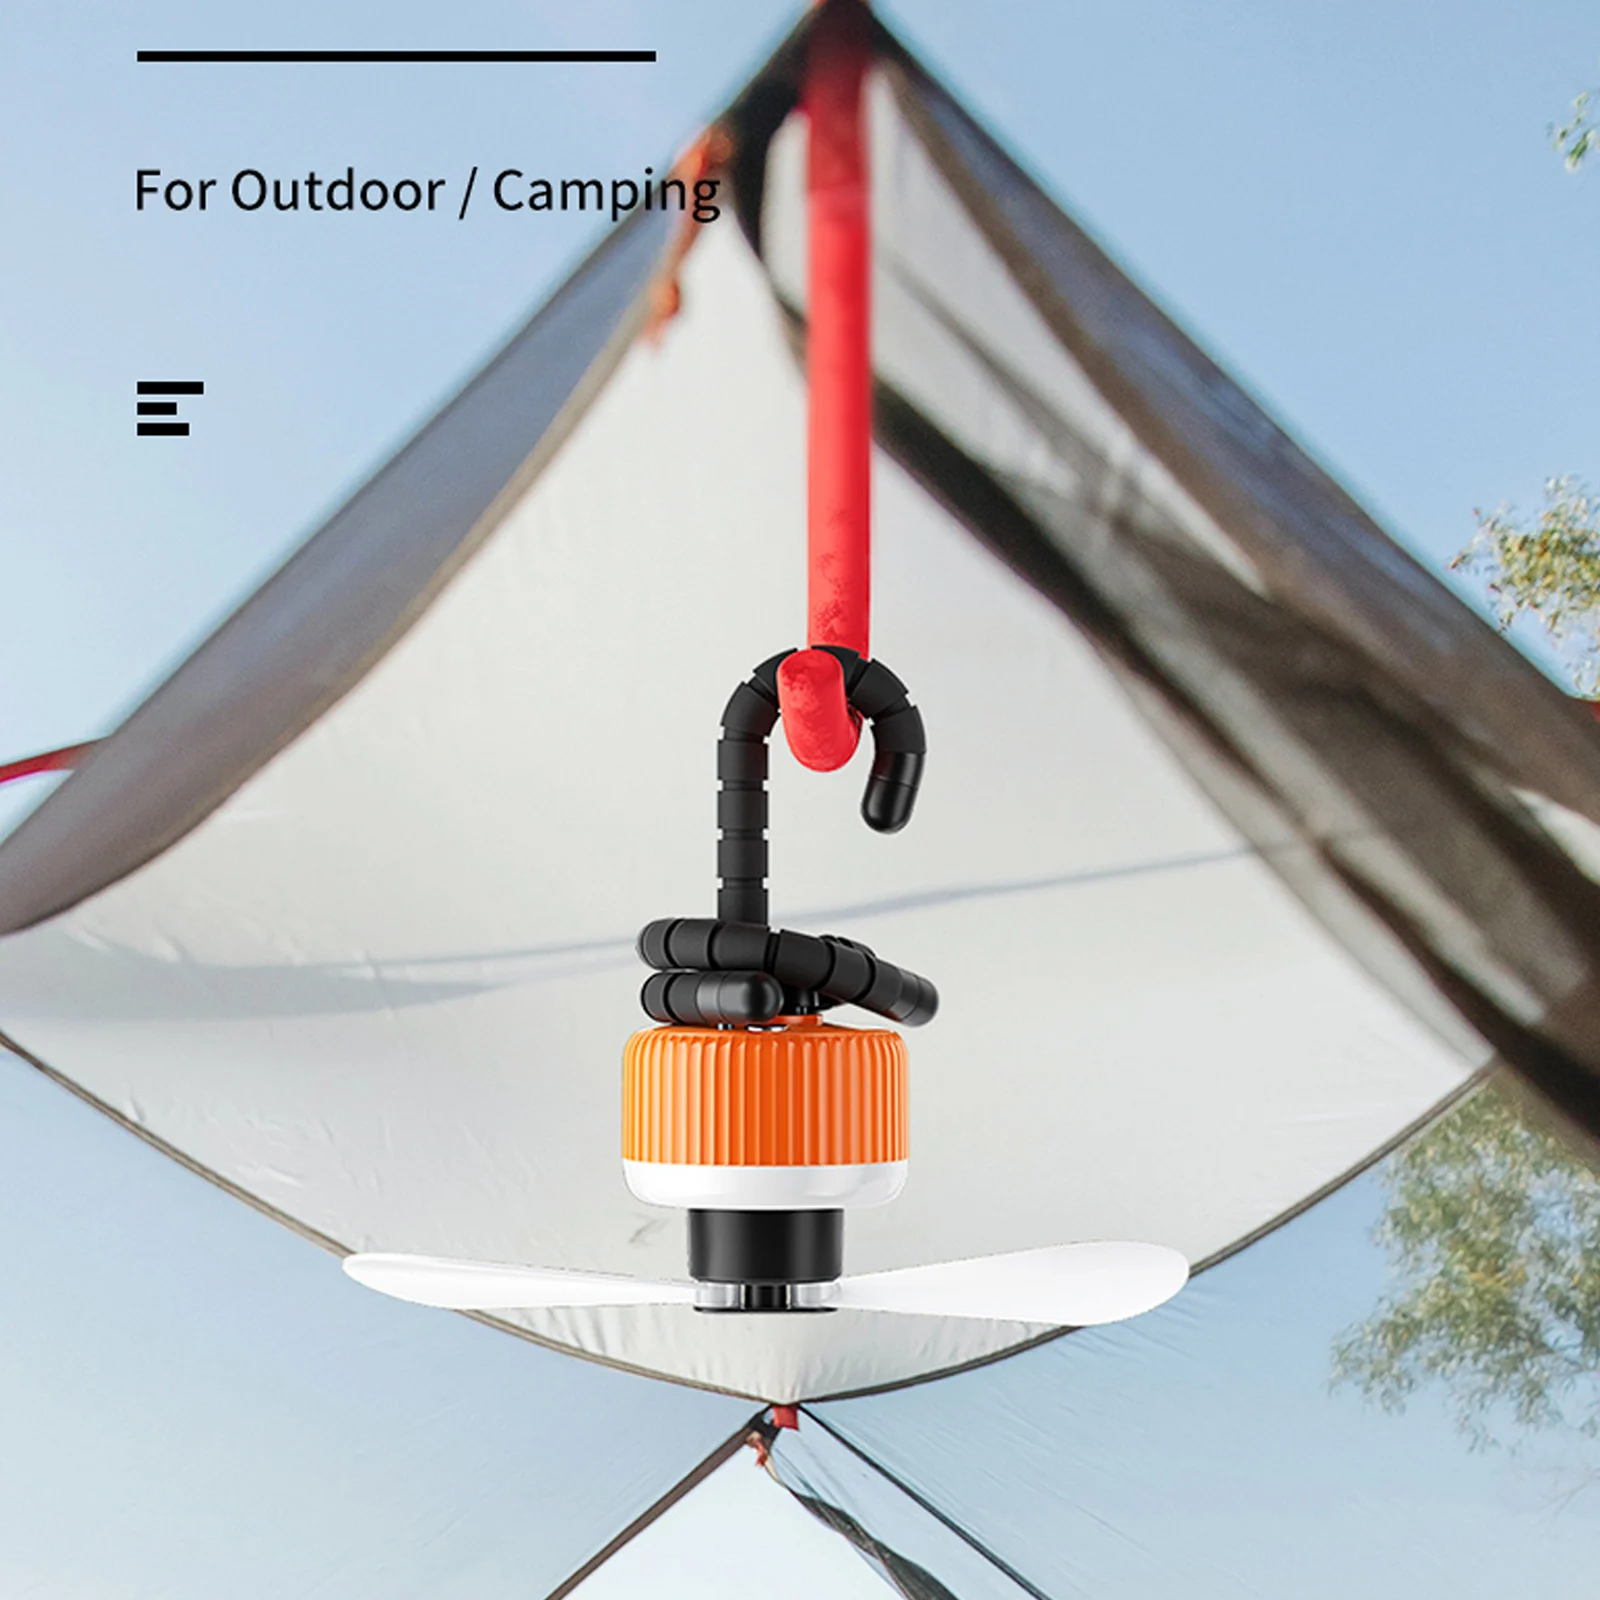 8000mah Camping Fan with LED Light, Auto-Oscillating Desk Fan with Remote & Hook, Rechargeable Battery Operated Tent Fan